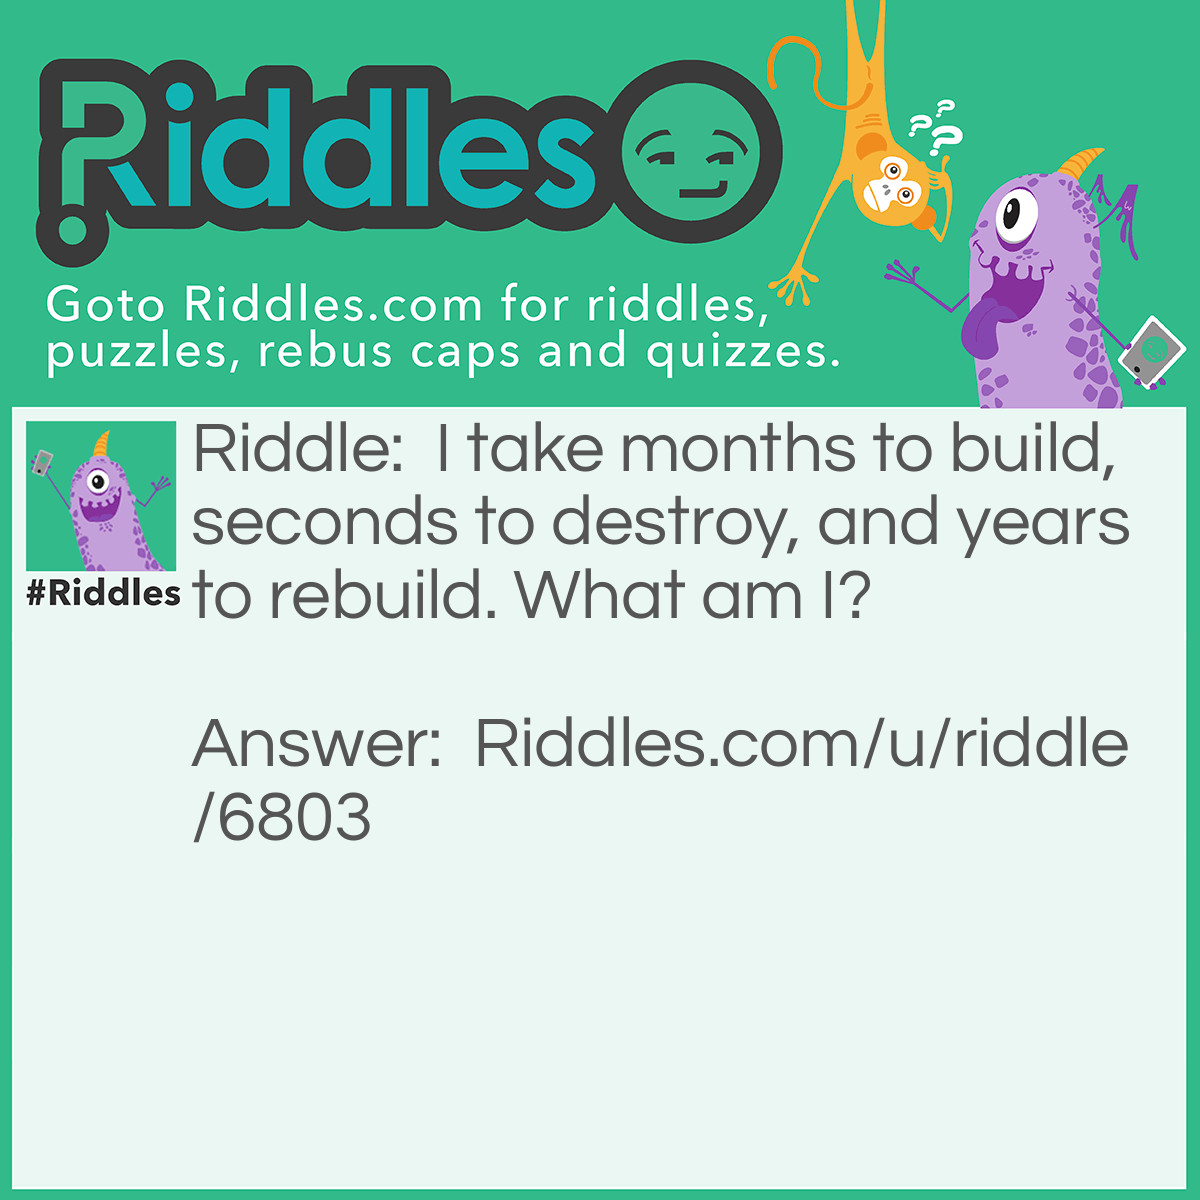 Riddle: I take months to build, seconds to destroy, and years to rebuild. What am I? Answer: Trust.